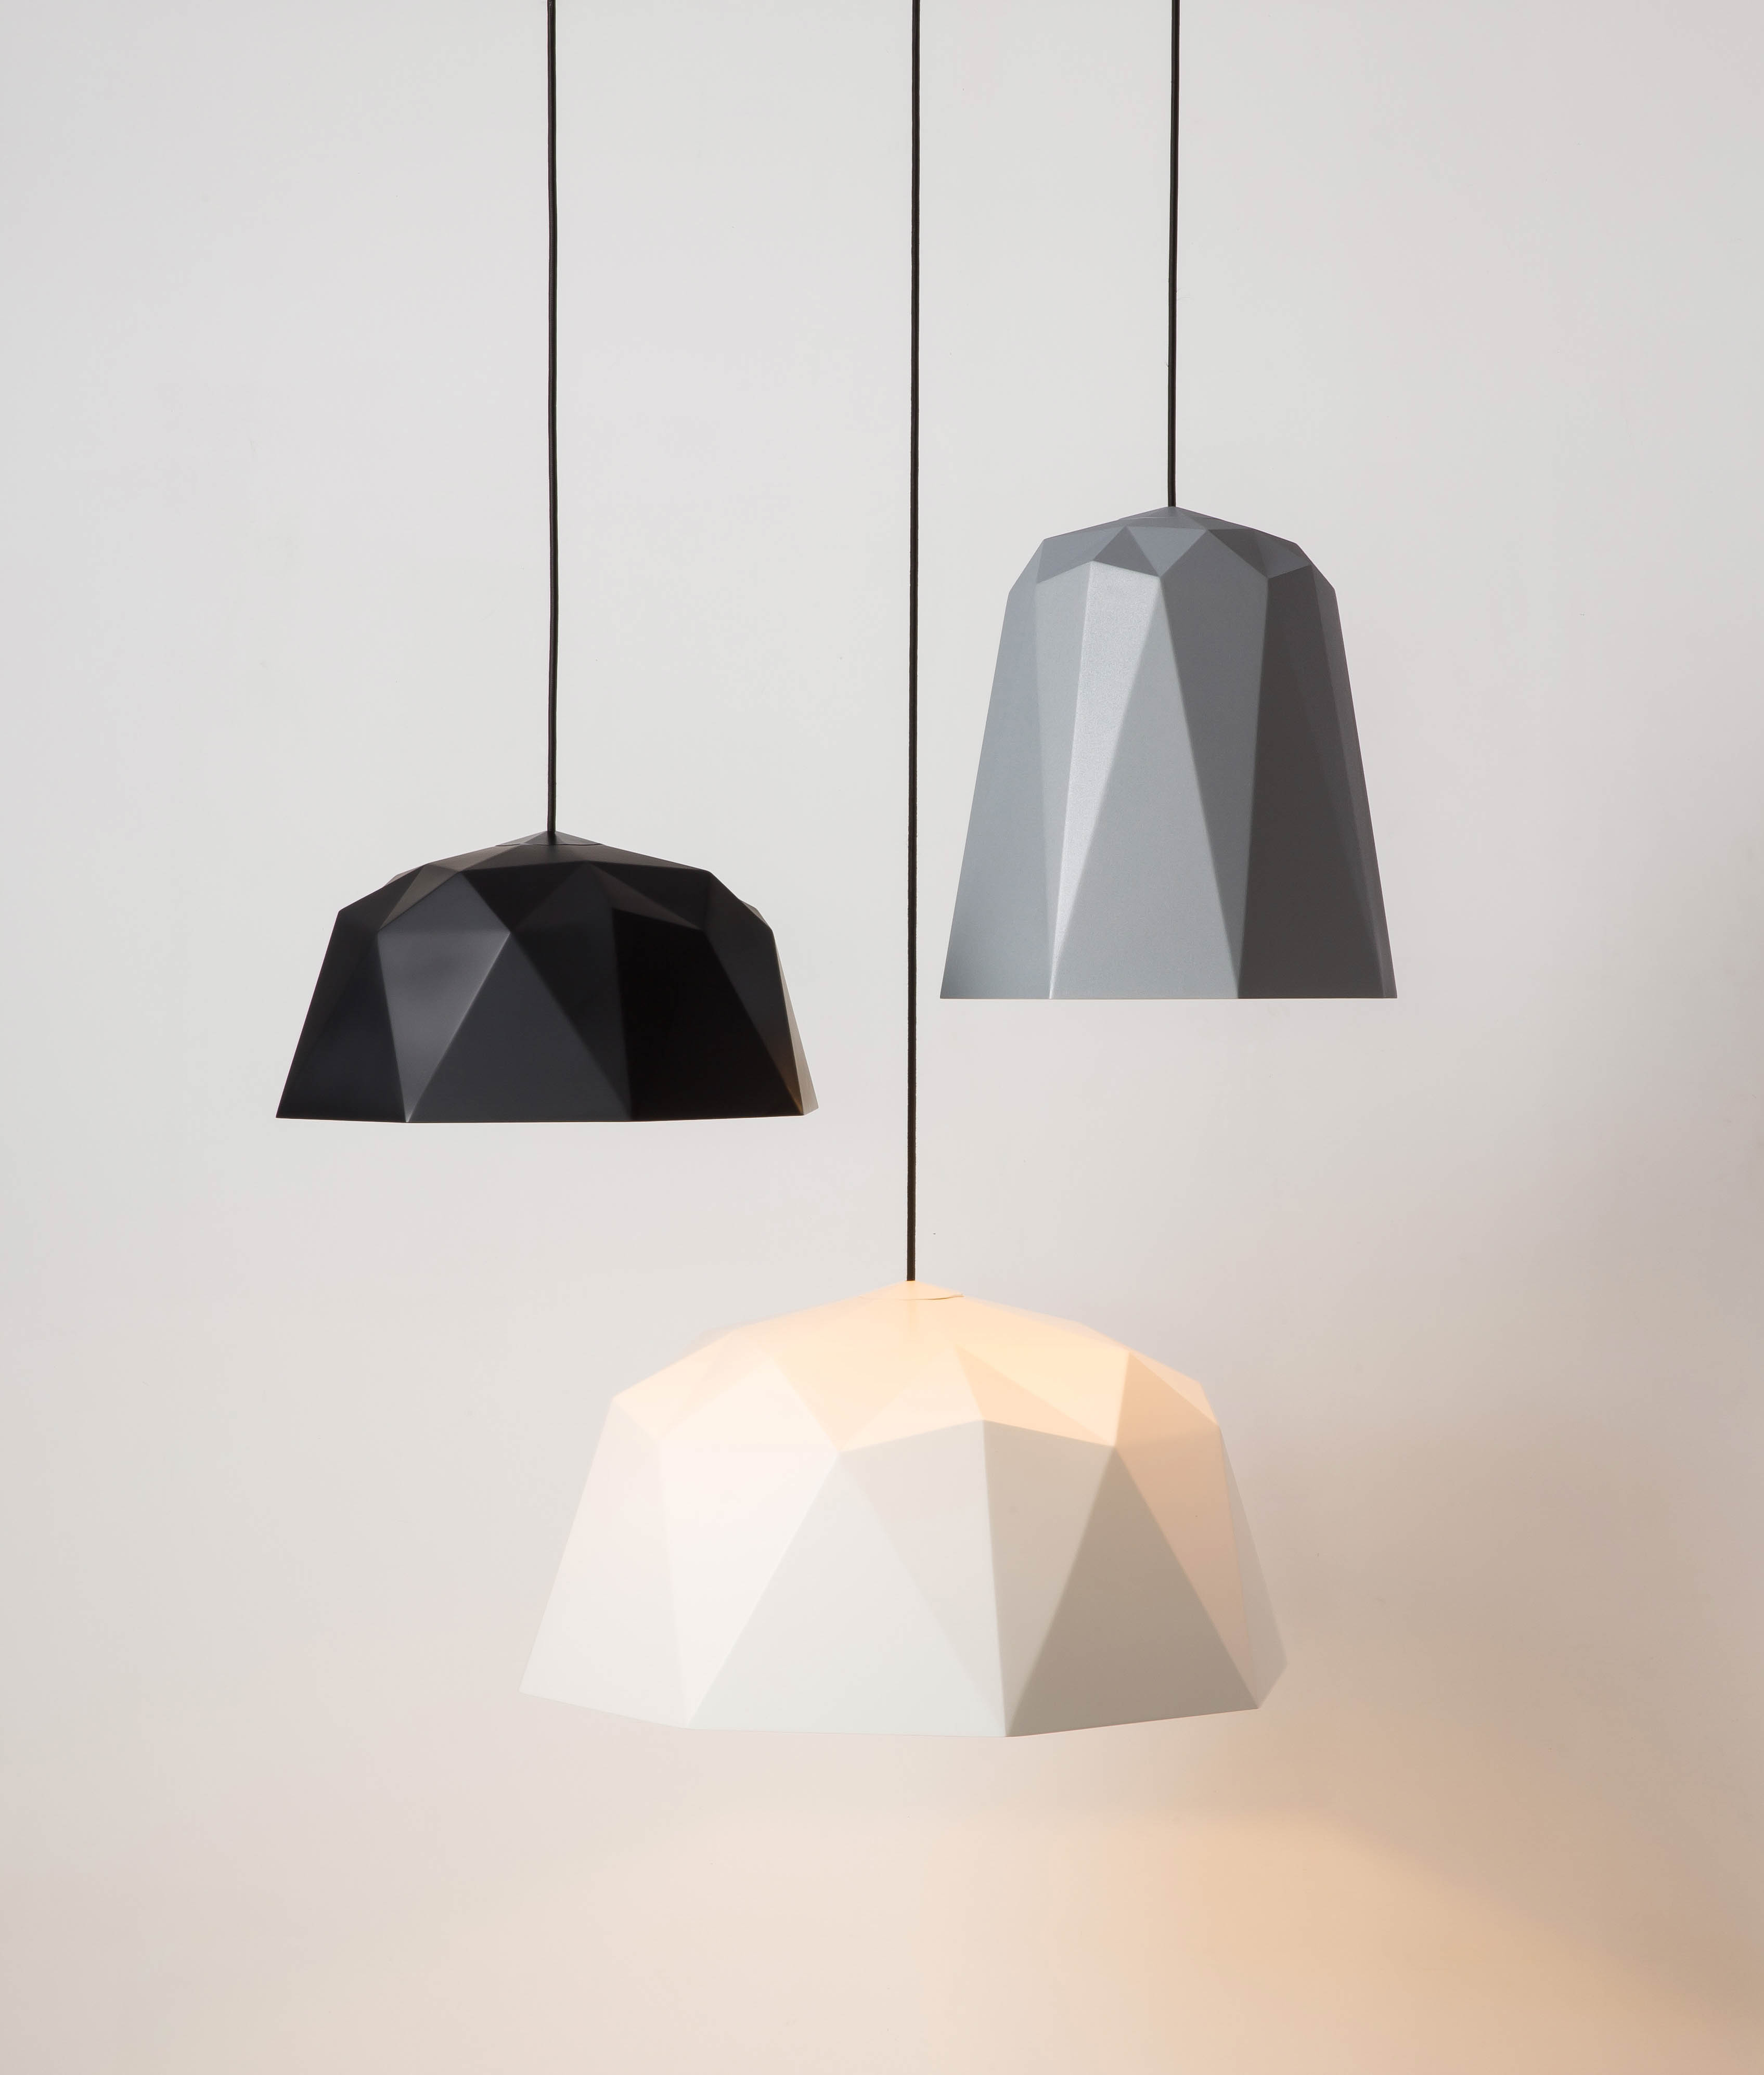 What’s Hot on Pinterest- 5 Inspiring Contemporary Lamps